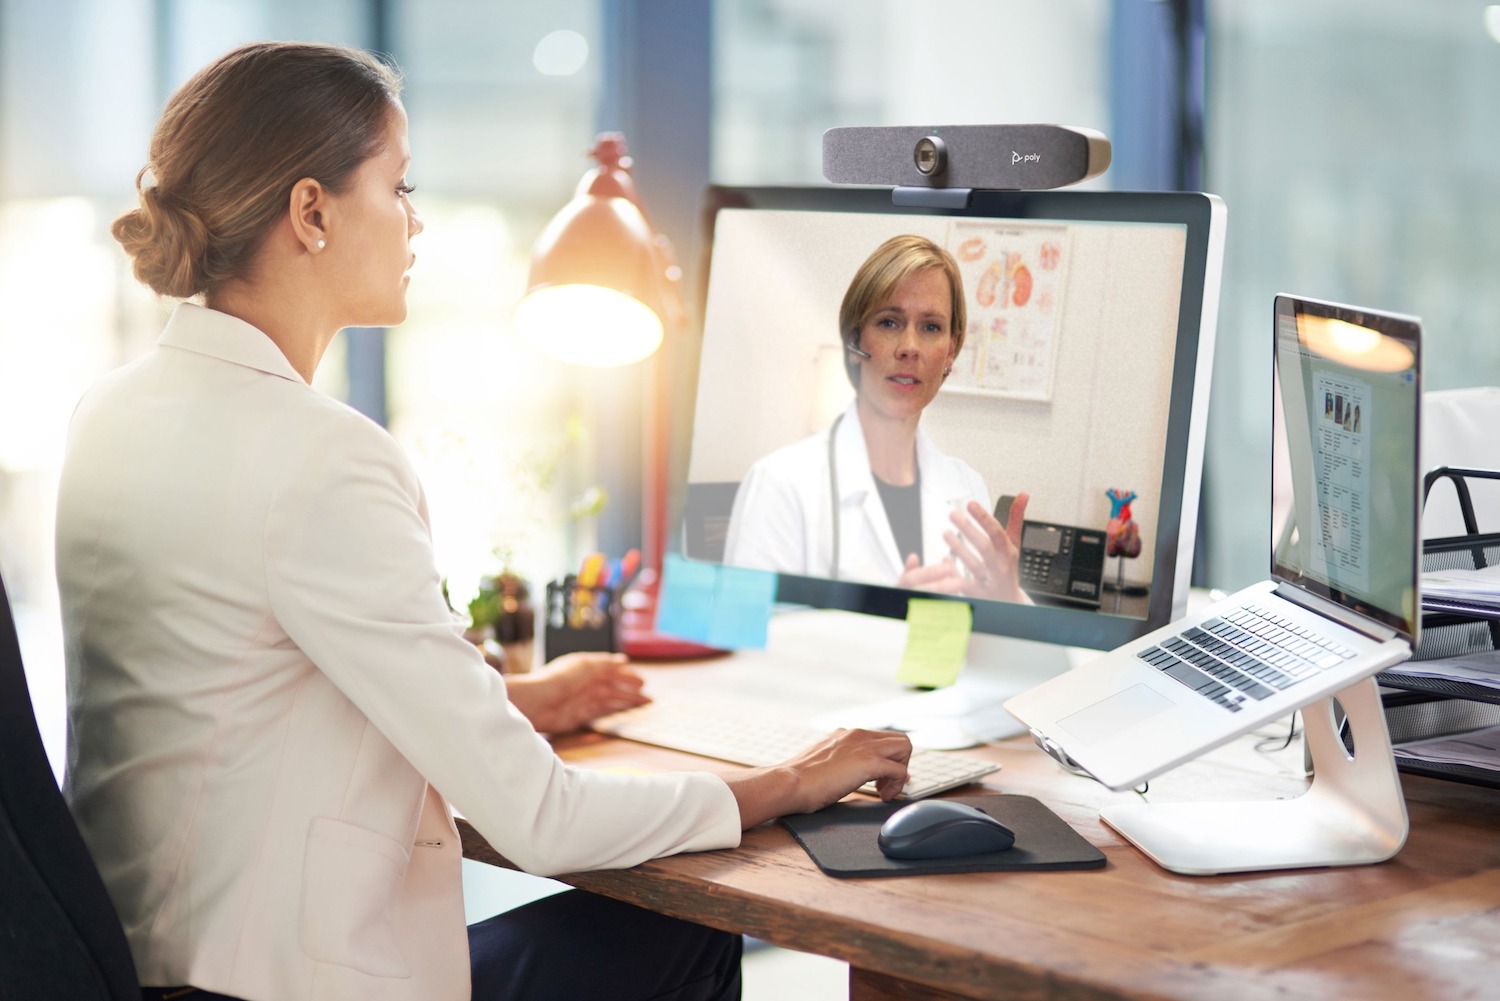 A healthcare professional uses the PolyStudio P15 personal video bar.